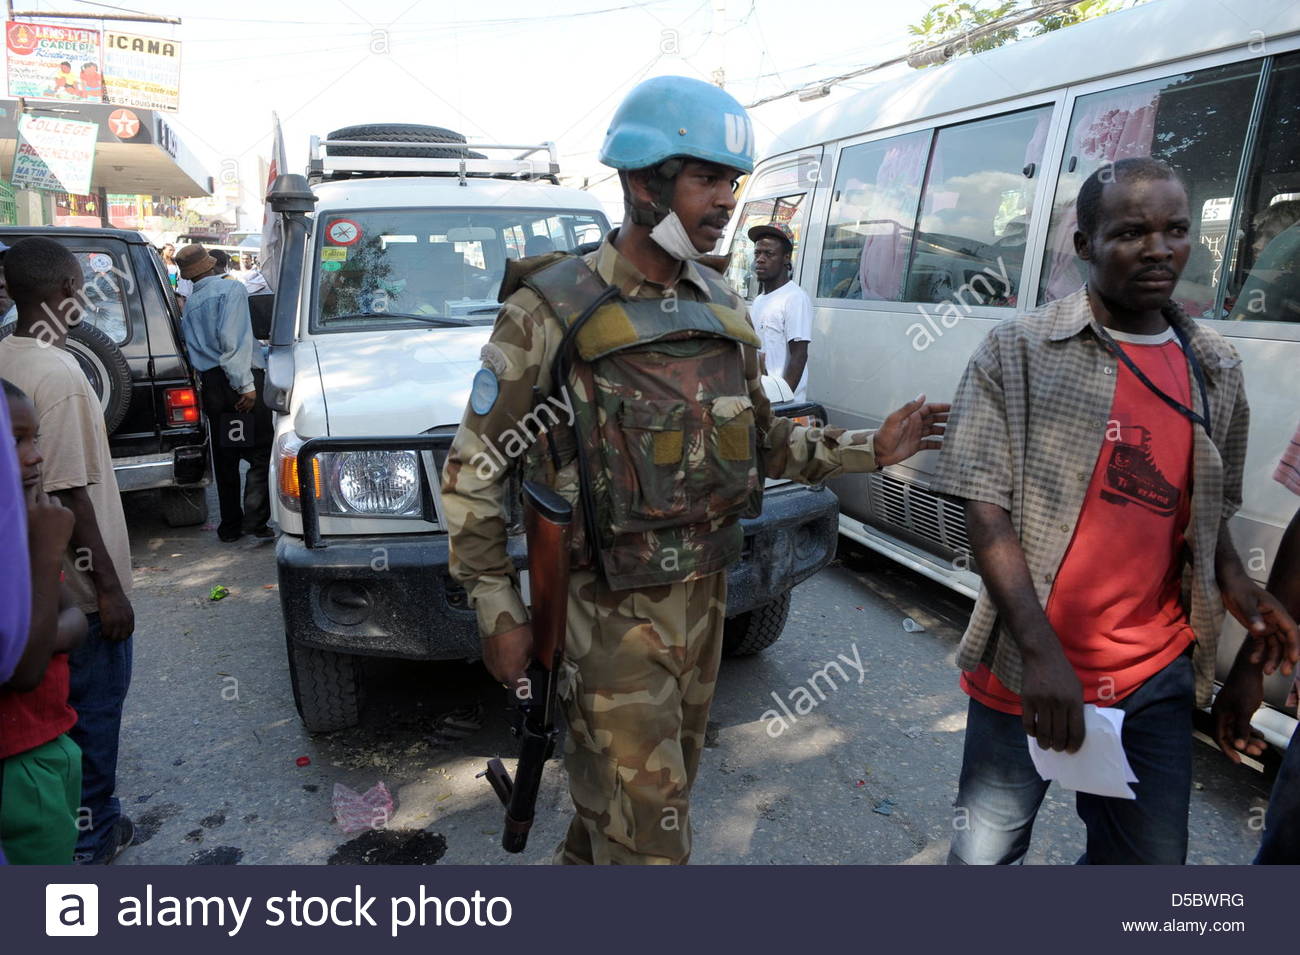 a-un-soldier-stands-guard-in-a-busy-street-in-port-au-prince-haiti-D5BWRG.jpg